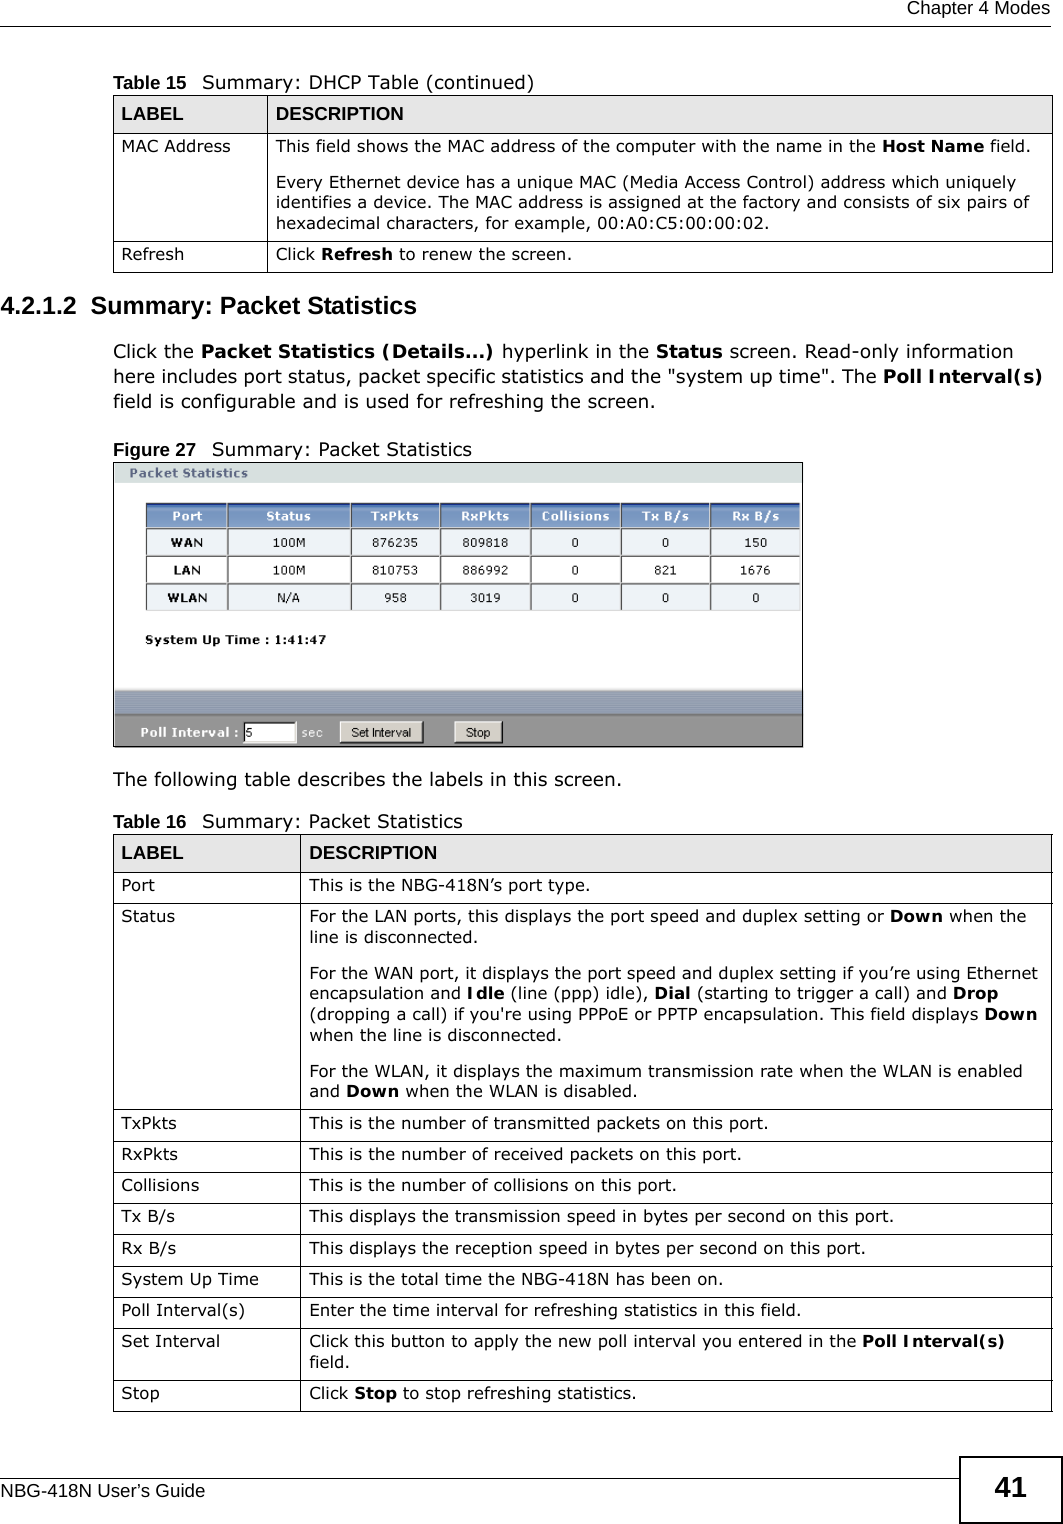  Chapter 4 ModesNBG-418N User’s Guide 414.2.1.2  Summary: Packet Statistics   Click the Packet Statistics (Details...) hyperlink in the Status screen. Read-only information here includes port status, packet specific statistics and the &quot;system up time&quot;. The Poll Interval(s) field is configurable and is used for refreshing the screen.Figure 27   Summary: Packet Statistics The following table describes the labels in this screen.MAC Address This field shows the MAC address of the computer with the name in the Host Name field.Every Ethernet device has a unique MAC (Media Access Control) address which uniquely identifies a device. The MAC address is assigned at the factory and consists of six pairs of hexadecimal characters, for example, 00:A0:C5:00:00:02.Refresh Click Refresh to renew the screen. Table 15   Summary: DHCP Table (continued)LABEL  DESCRIPTIONTable 16   Summary: Packet StatisticsLABEL DESCRIPTIONPort This is the NBG-418N’s port type.Status  For the LAN ports, this displays the port speed and duplex setting or Down when the line is disconnected.For the WAN port, it displays the port speed and duplex setting if you’re using Ethernet encapsulation and Idle (line (ppp) idle), Dial (starting to trigger a call) and Drop (dropping a call) if you&apos;re using PPPoE or PPTP encapsulation. This field displays Down when the line is disconnected.For the WLAN, it displays the maximum transmission rate when the WLAN is enabled and Down when the WLAN is disabled.TxPkts  This is the number of transmitted packets on this port.RxPkts  This is the number of received packets on this port.Collisions  This is the number of collisions on this port.Tx B/s  This displays the transmission speed in bytes per second on this port.Rx B/s This displays the reception speed in bytes per second on this port.System Up Time This is the total time the NBG-418N has been on.Poll Interval(s) Enter the time interval for refreshing statistics in this field.Set Interval Click this button to apply the new poll interval you entered in the Poll Interval(s) field.Stop Click Stop to stop refreshing statistics.